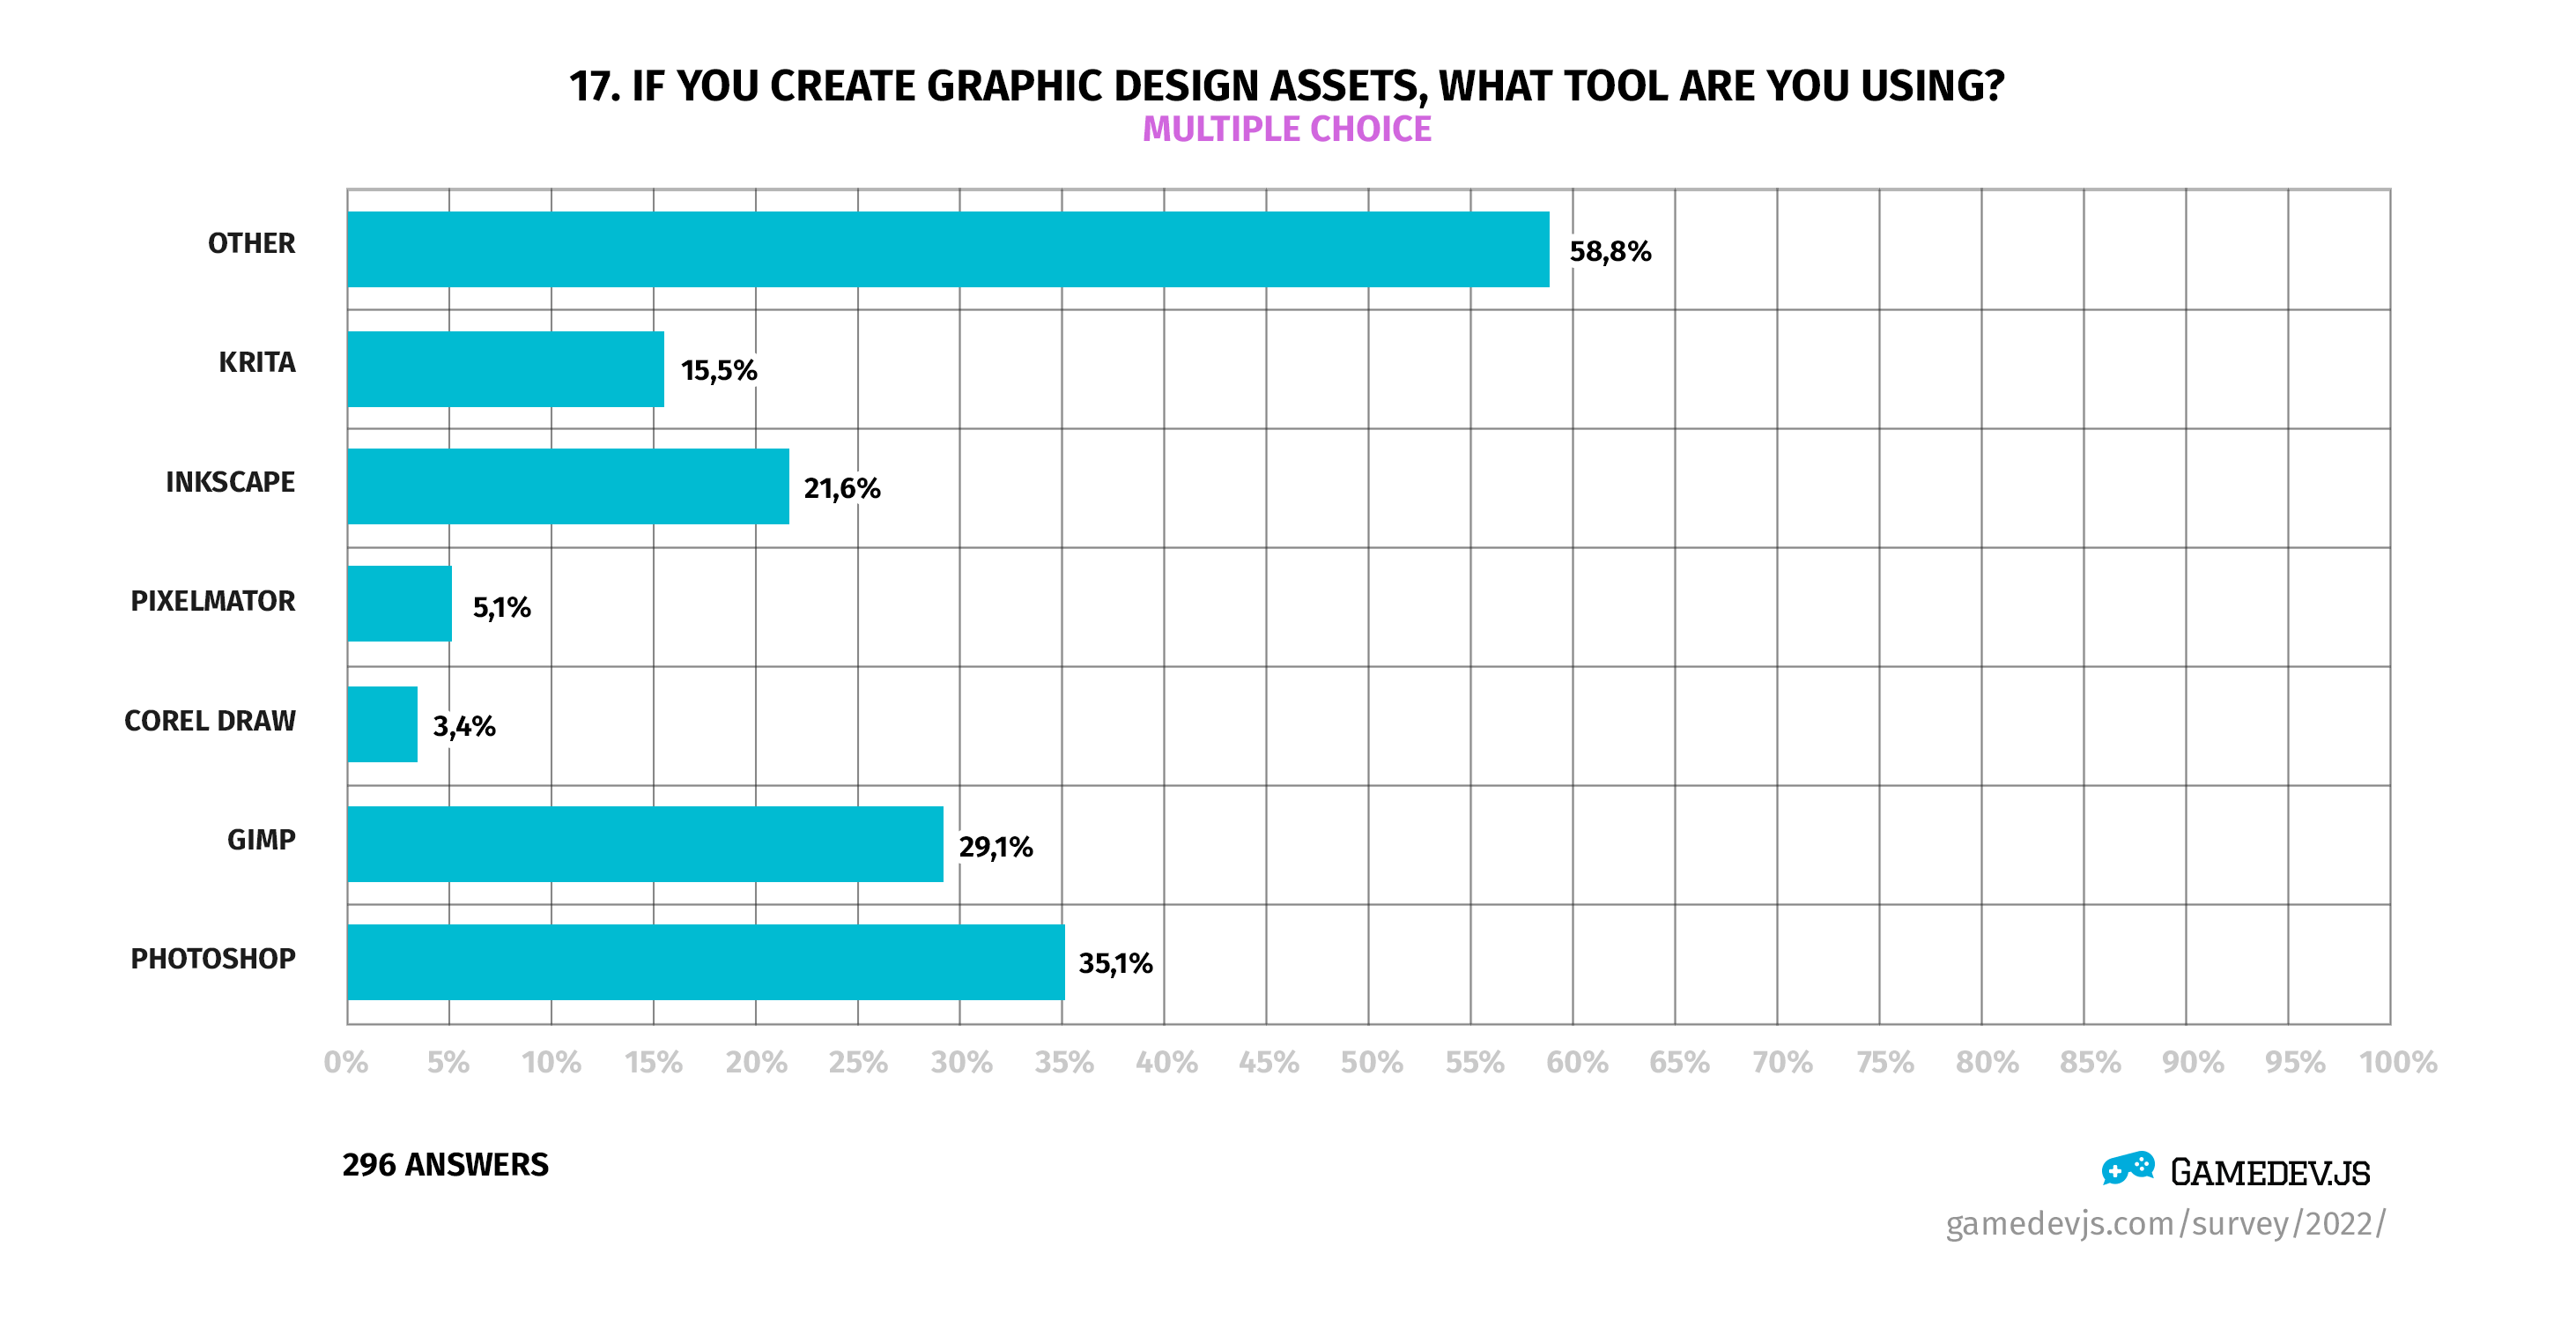 Gamedev.js Survey 2022 - Question #17: If you create graphic design assets, what tool are you using?